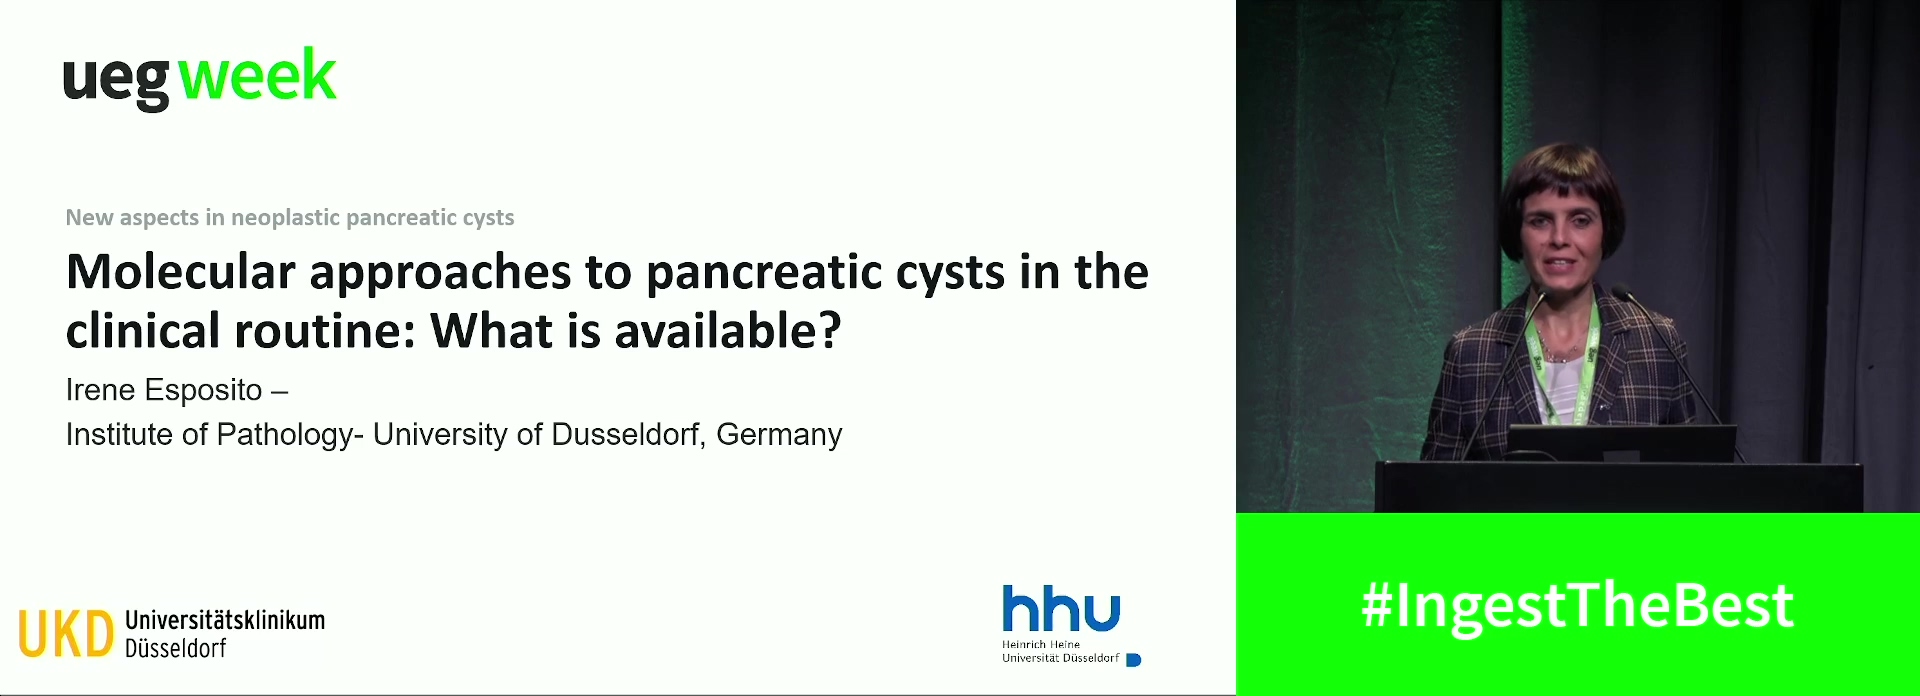 Molecular approaches to pancreatic cysts in the clinical routine: What is available?